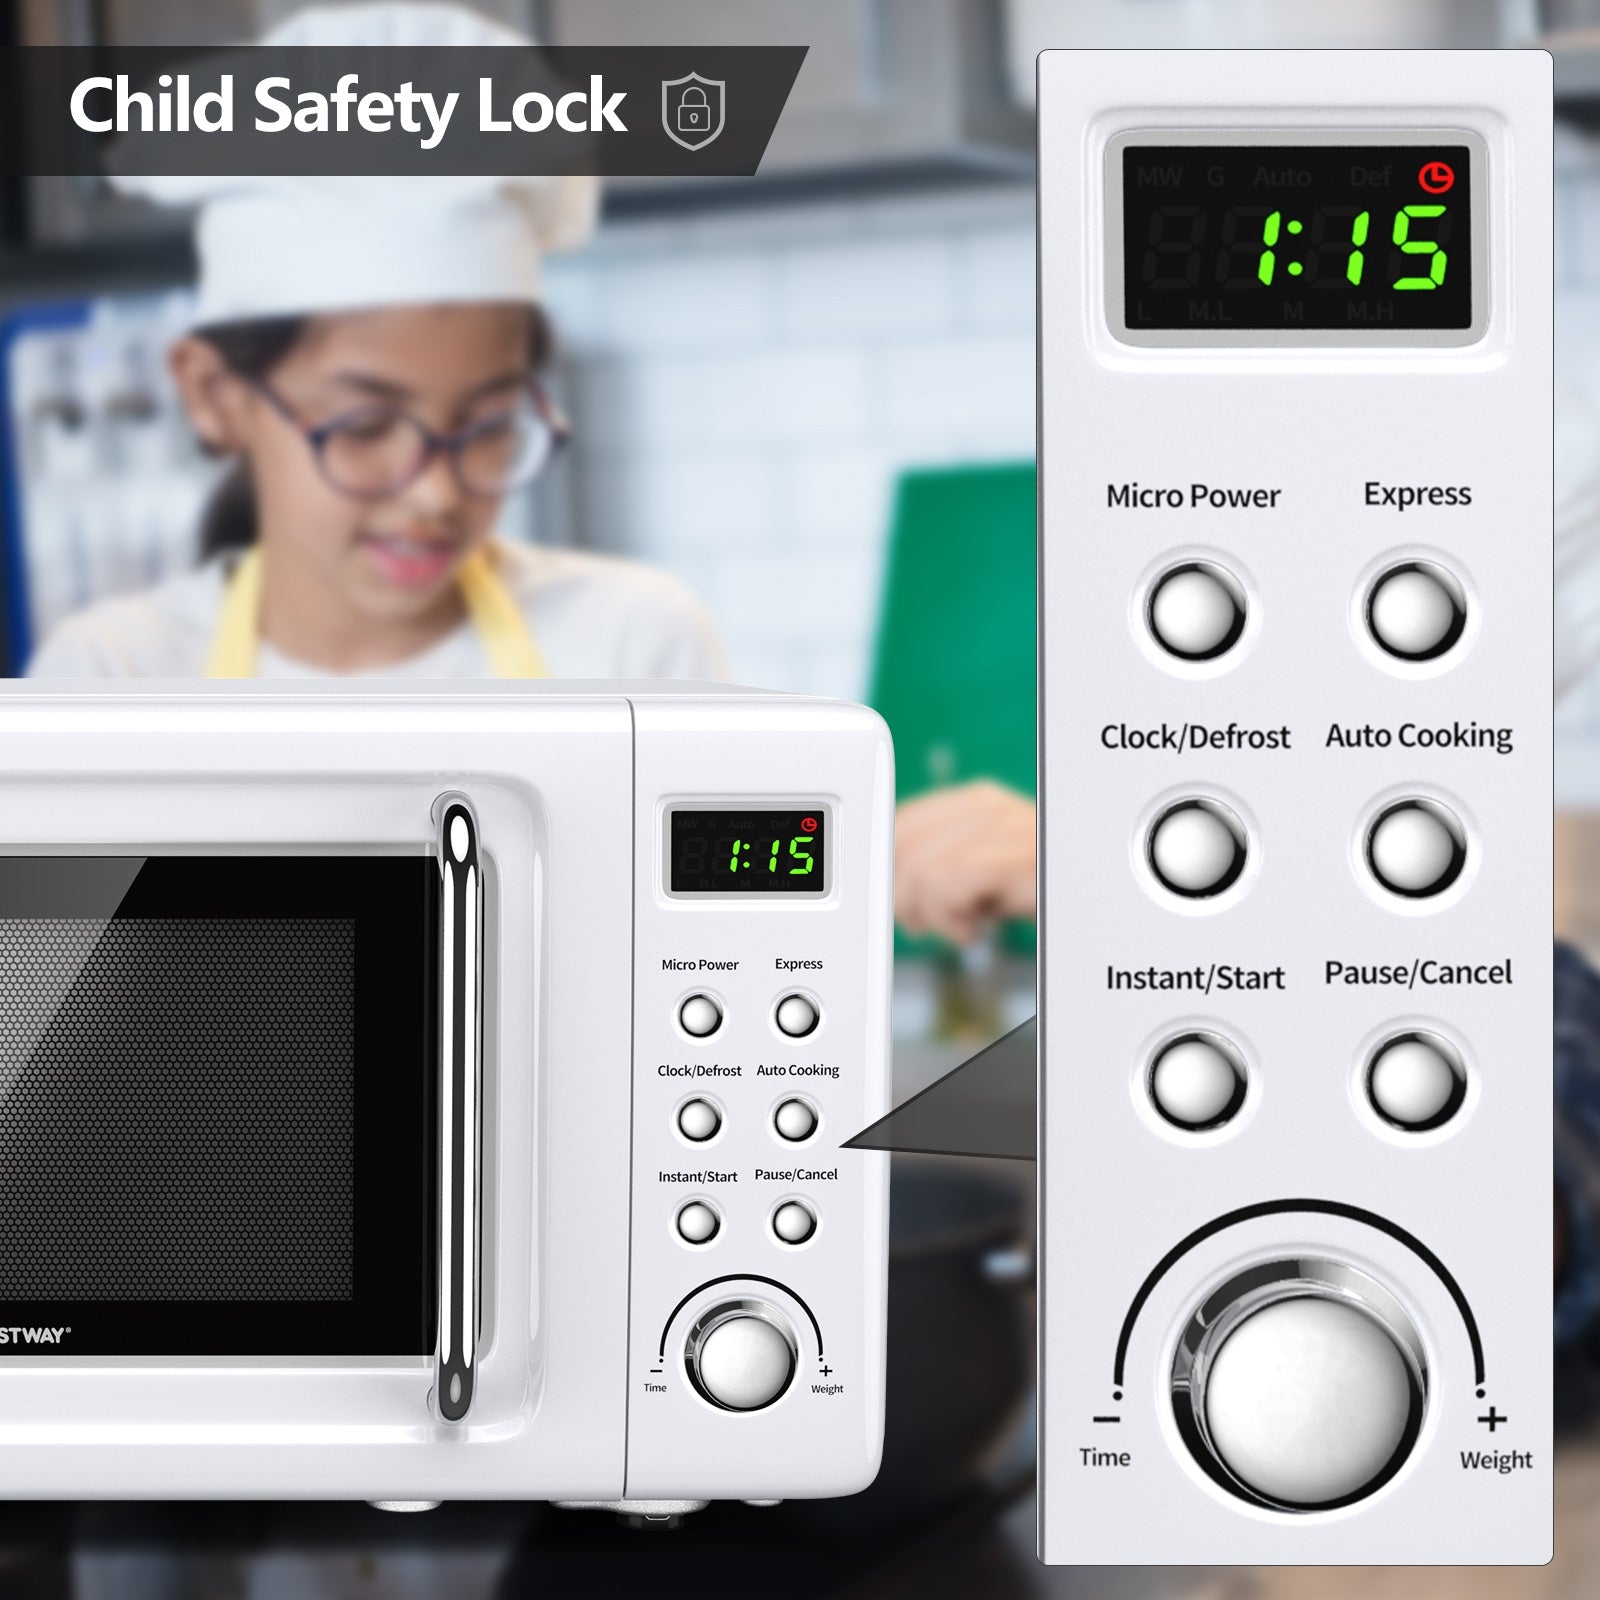 Completion Sound and Child Lock Design: Enjoy peace of mind with our microwave oven's completion sound that signals the end of cooking with three beeps. The built-in child lock prevents accidental touching, ensuring improved security and safety. Rest assured, our microwave oven is ETL and UL-certified, guaranteeing its safety and suitability for use.